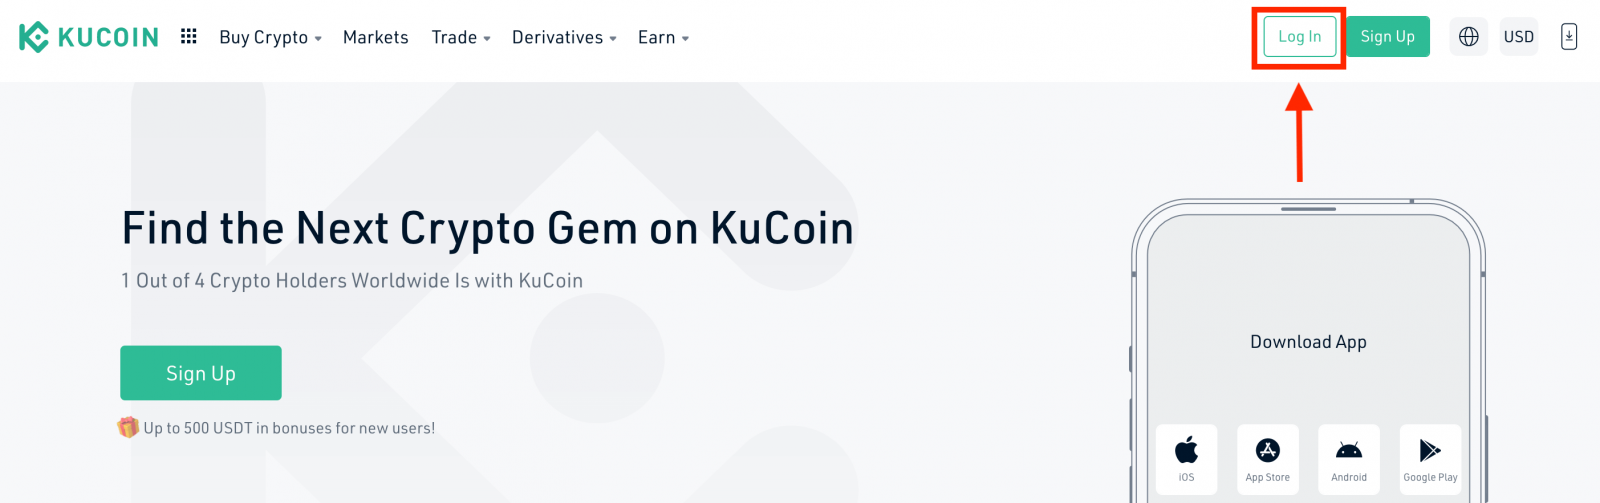 How to Register and Login Account in KuCoin